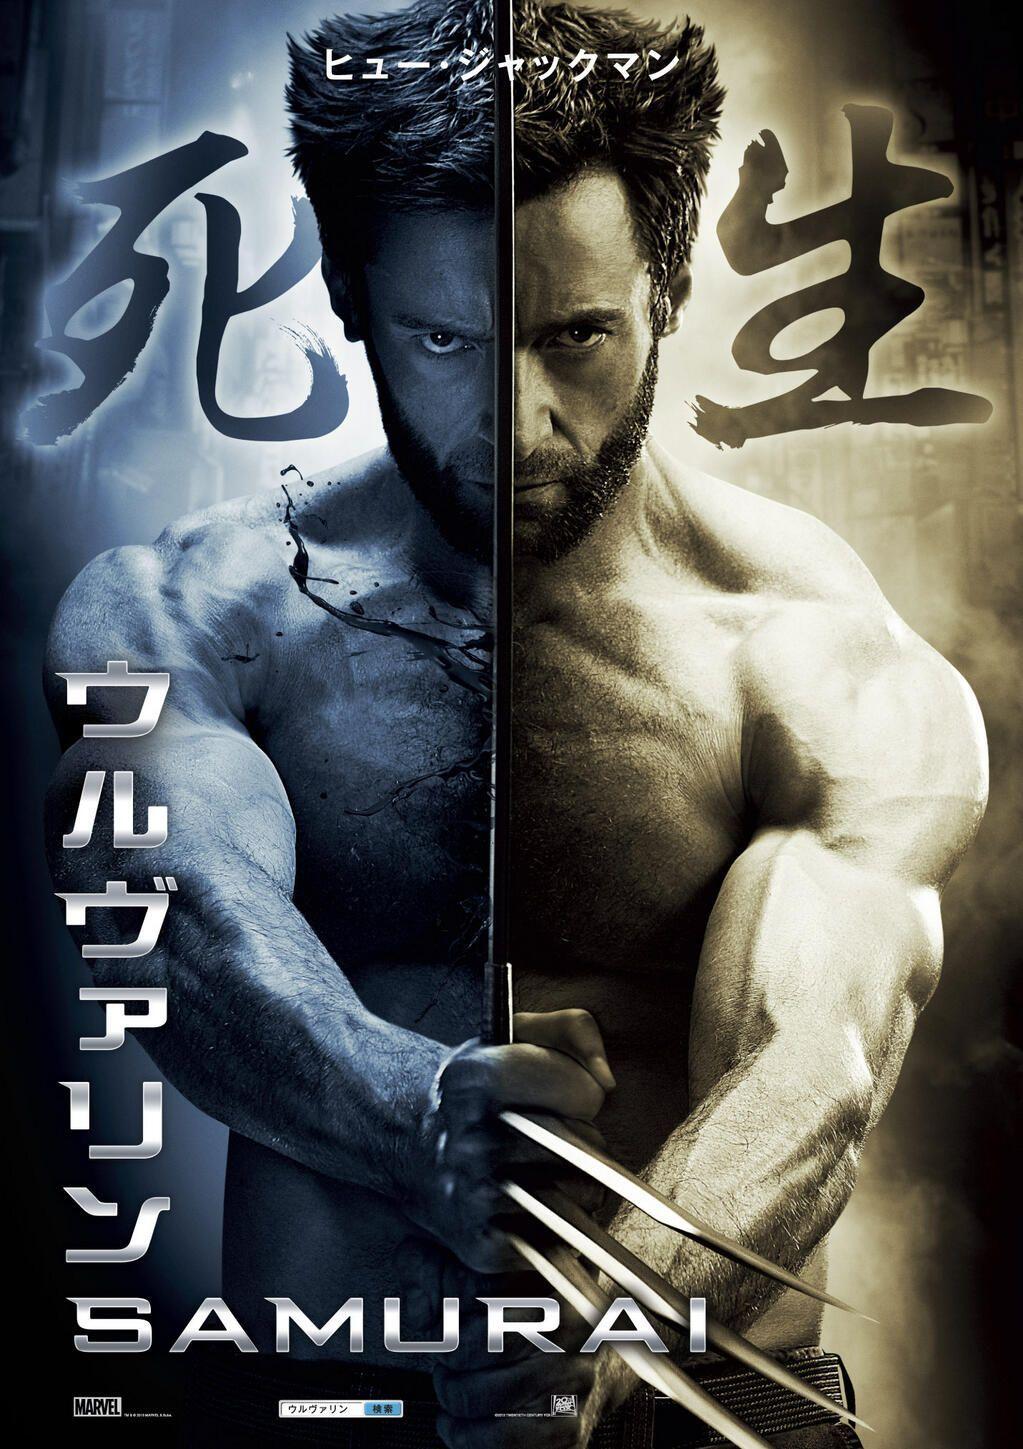 The Wolverine&; Poster Has Logan Split Down the Middle